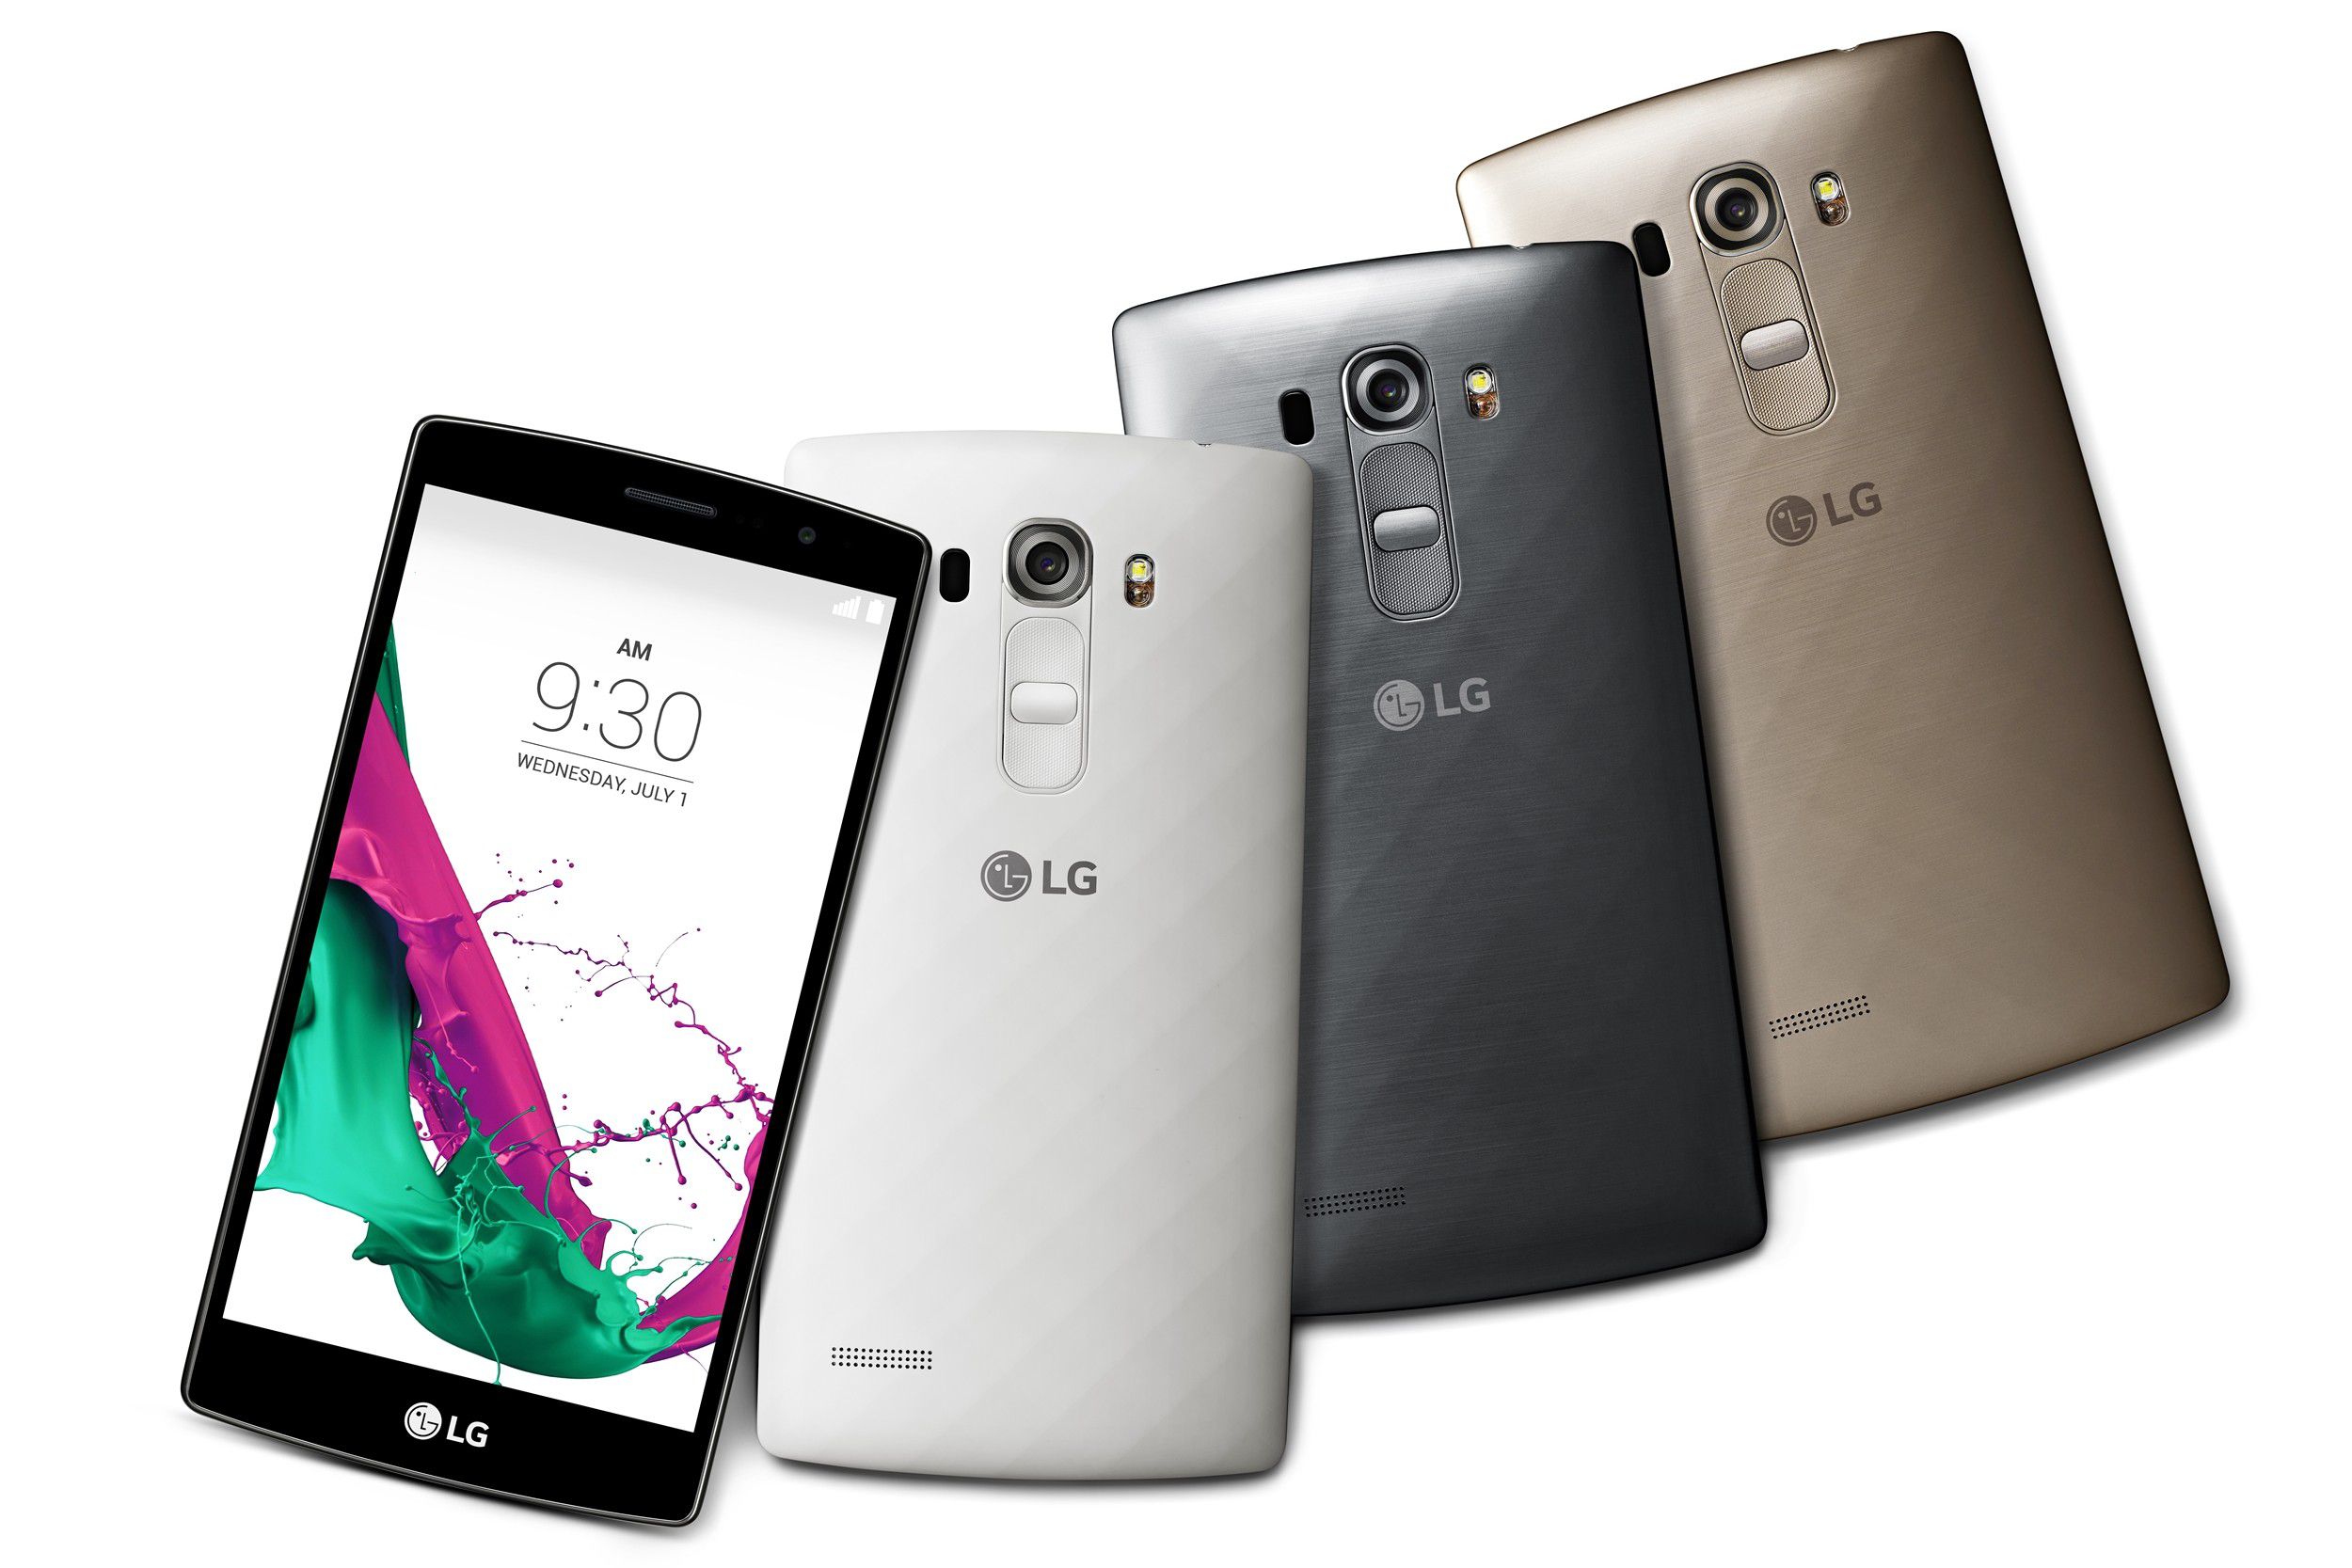 LG G4 Beat Full Technical Specifications